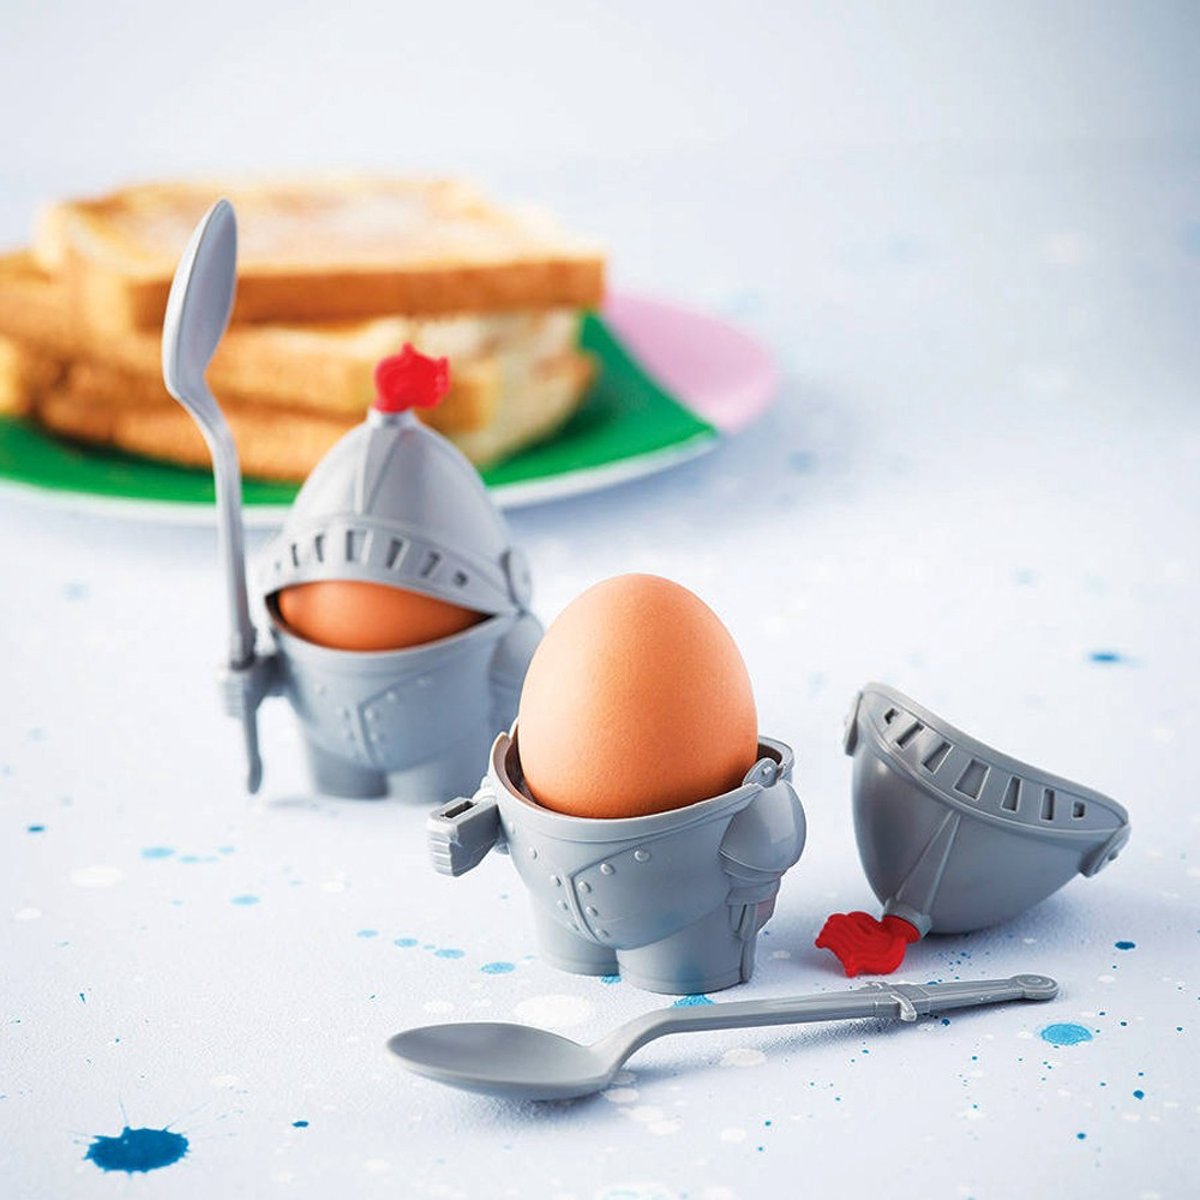 http://www.home-designing.com/product-of-the-week-the-knight-egg-holder